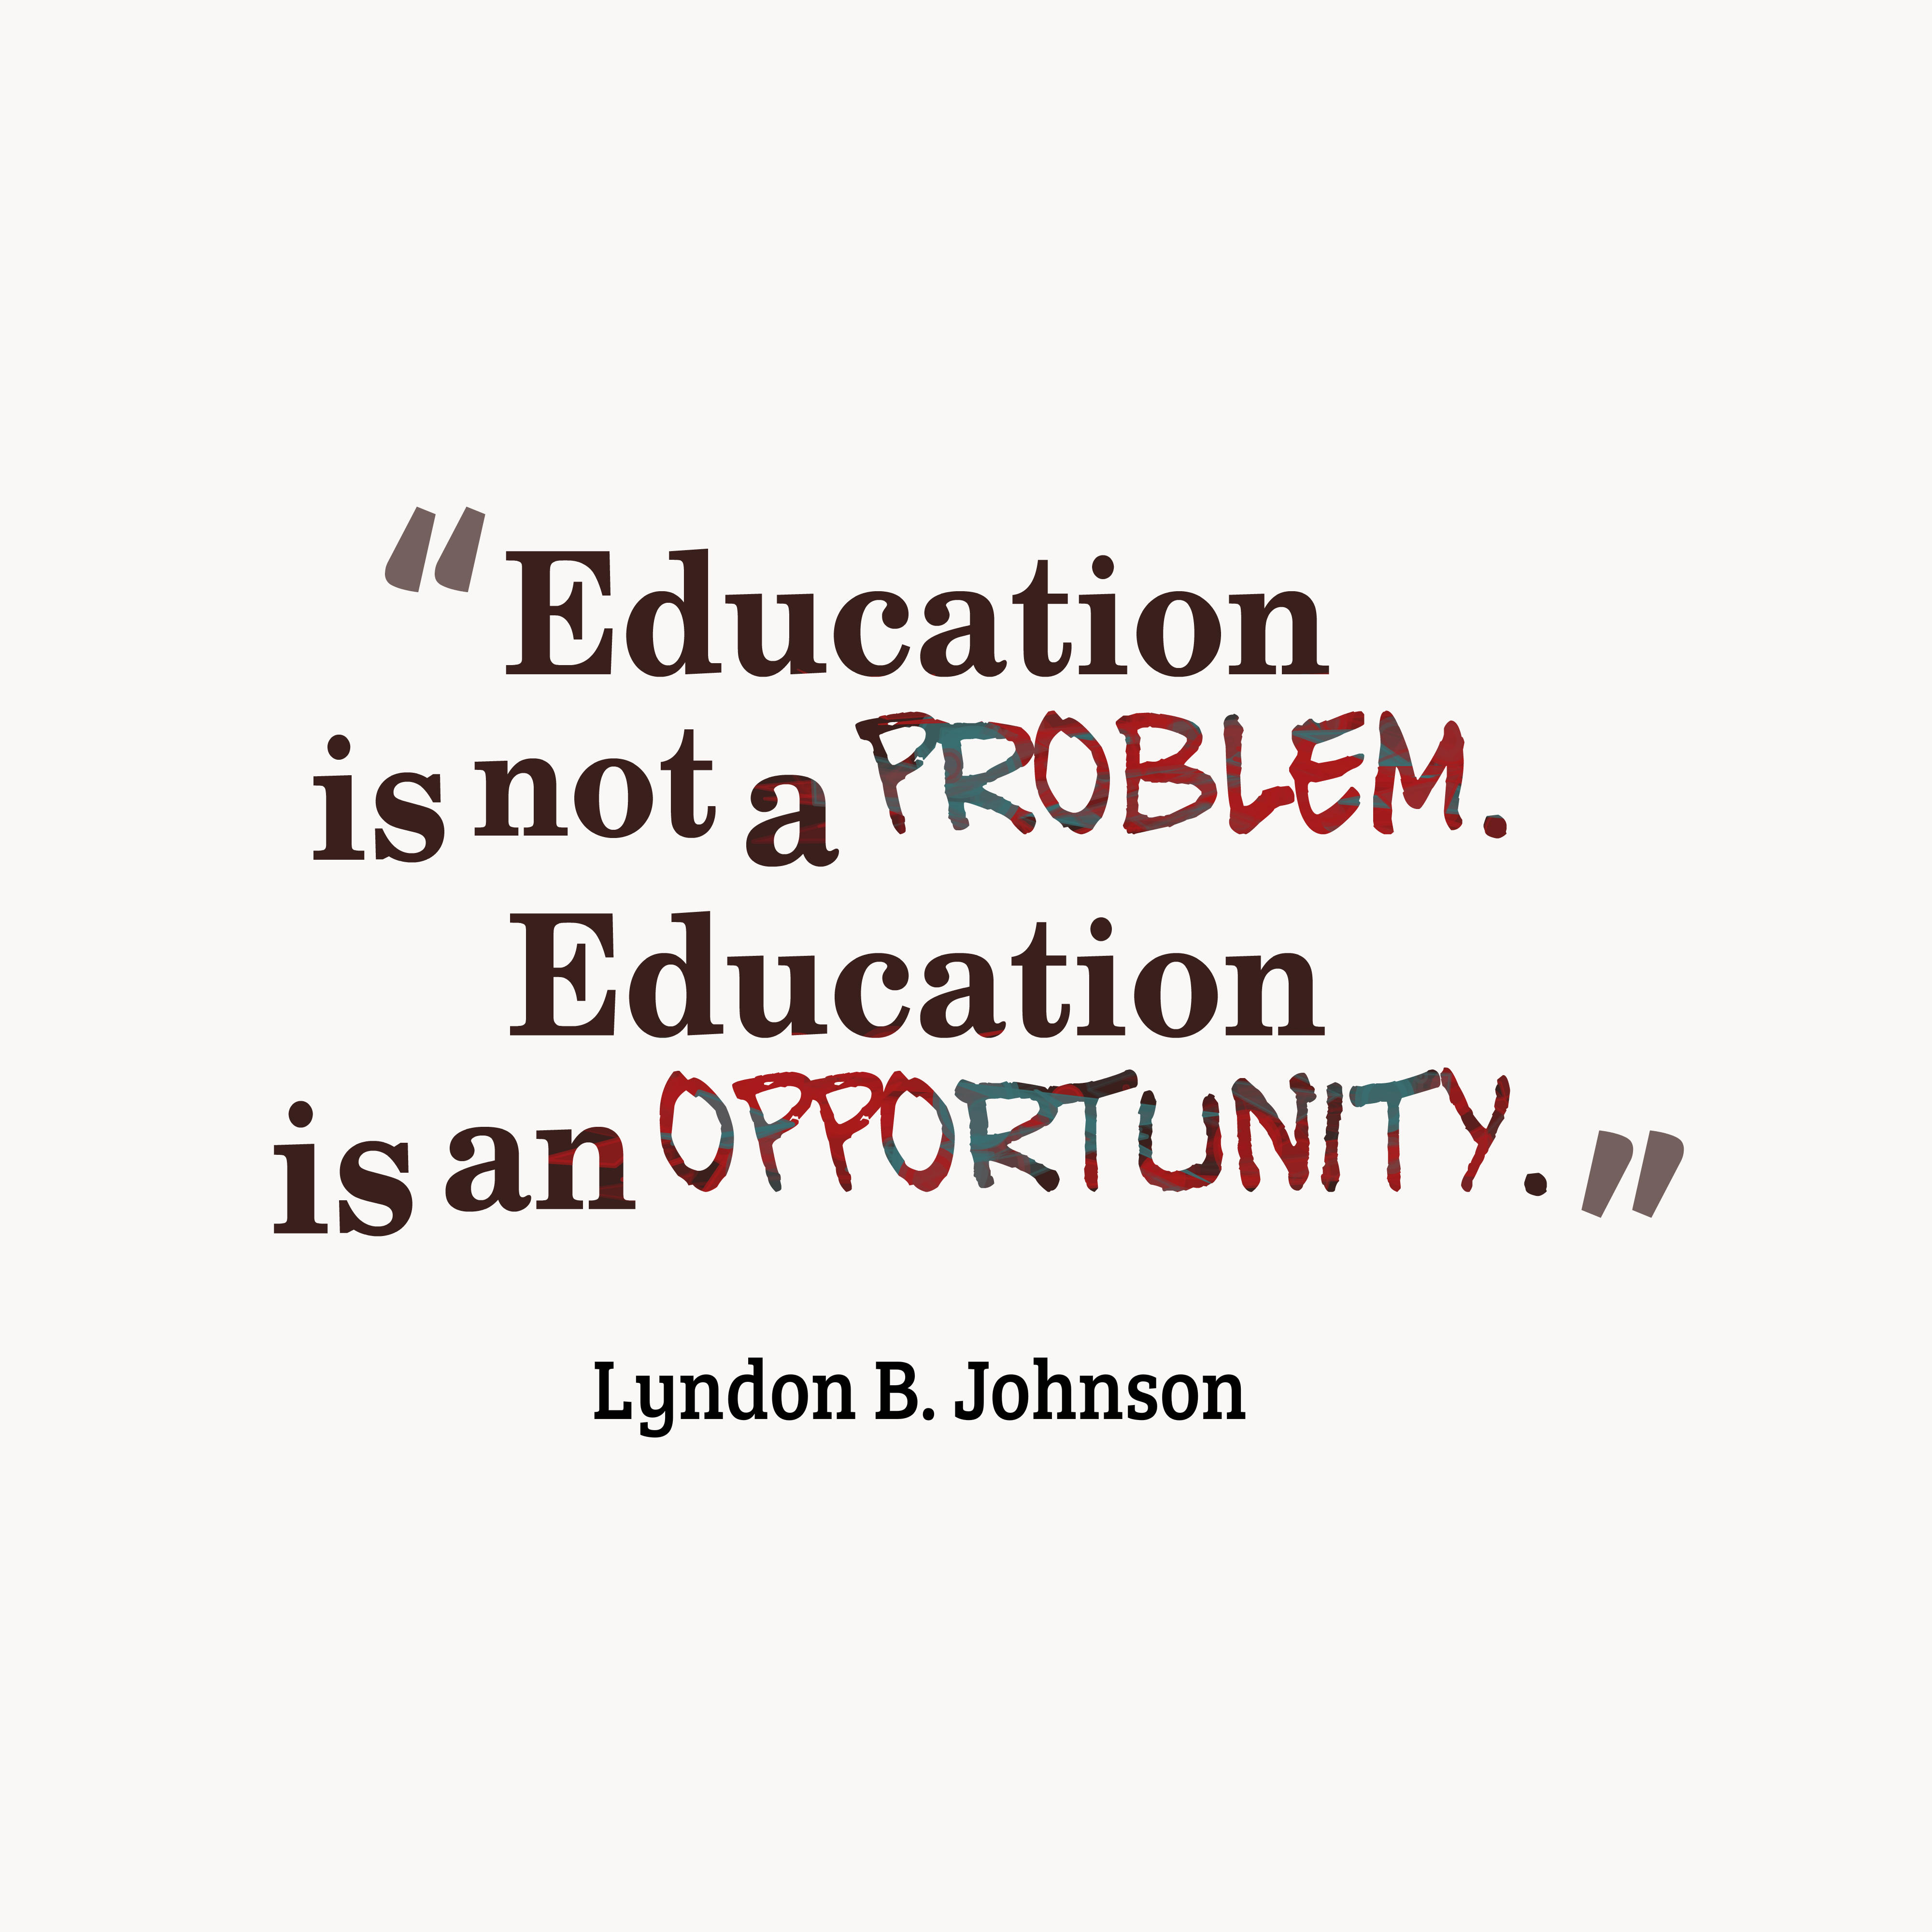 Education is not a problem. Education is an opportunity. - Lyndon B. Johnson